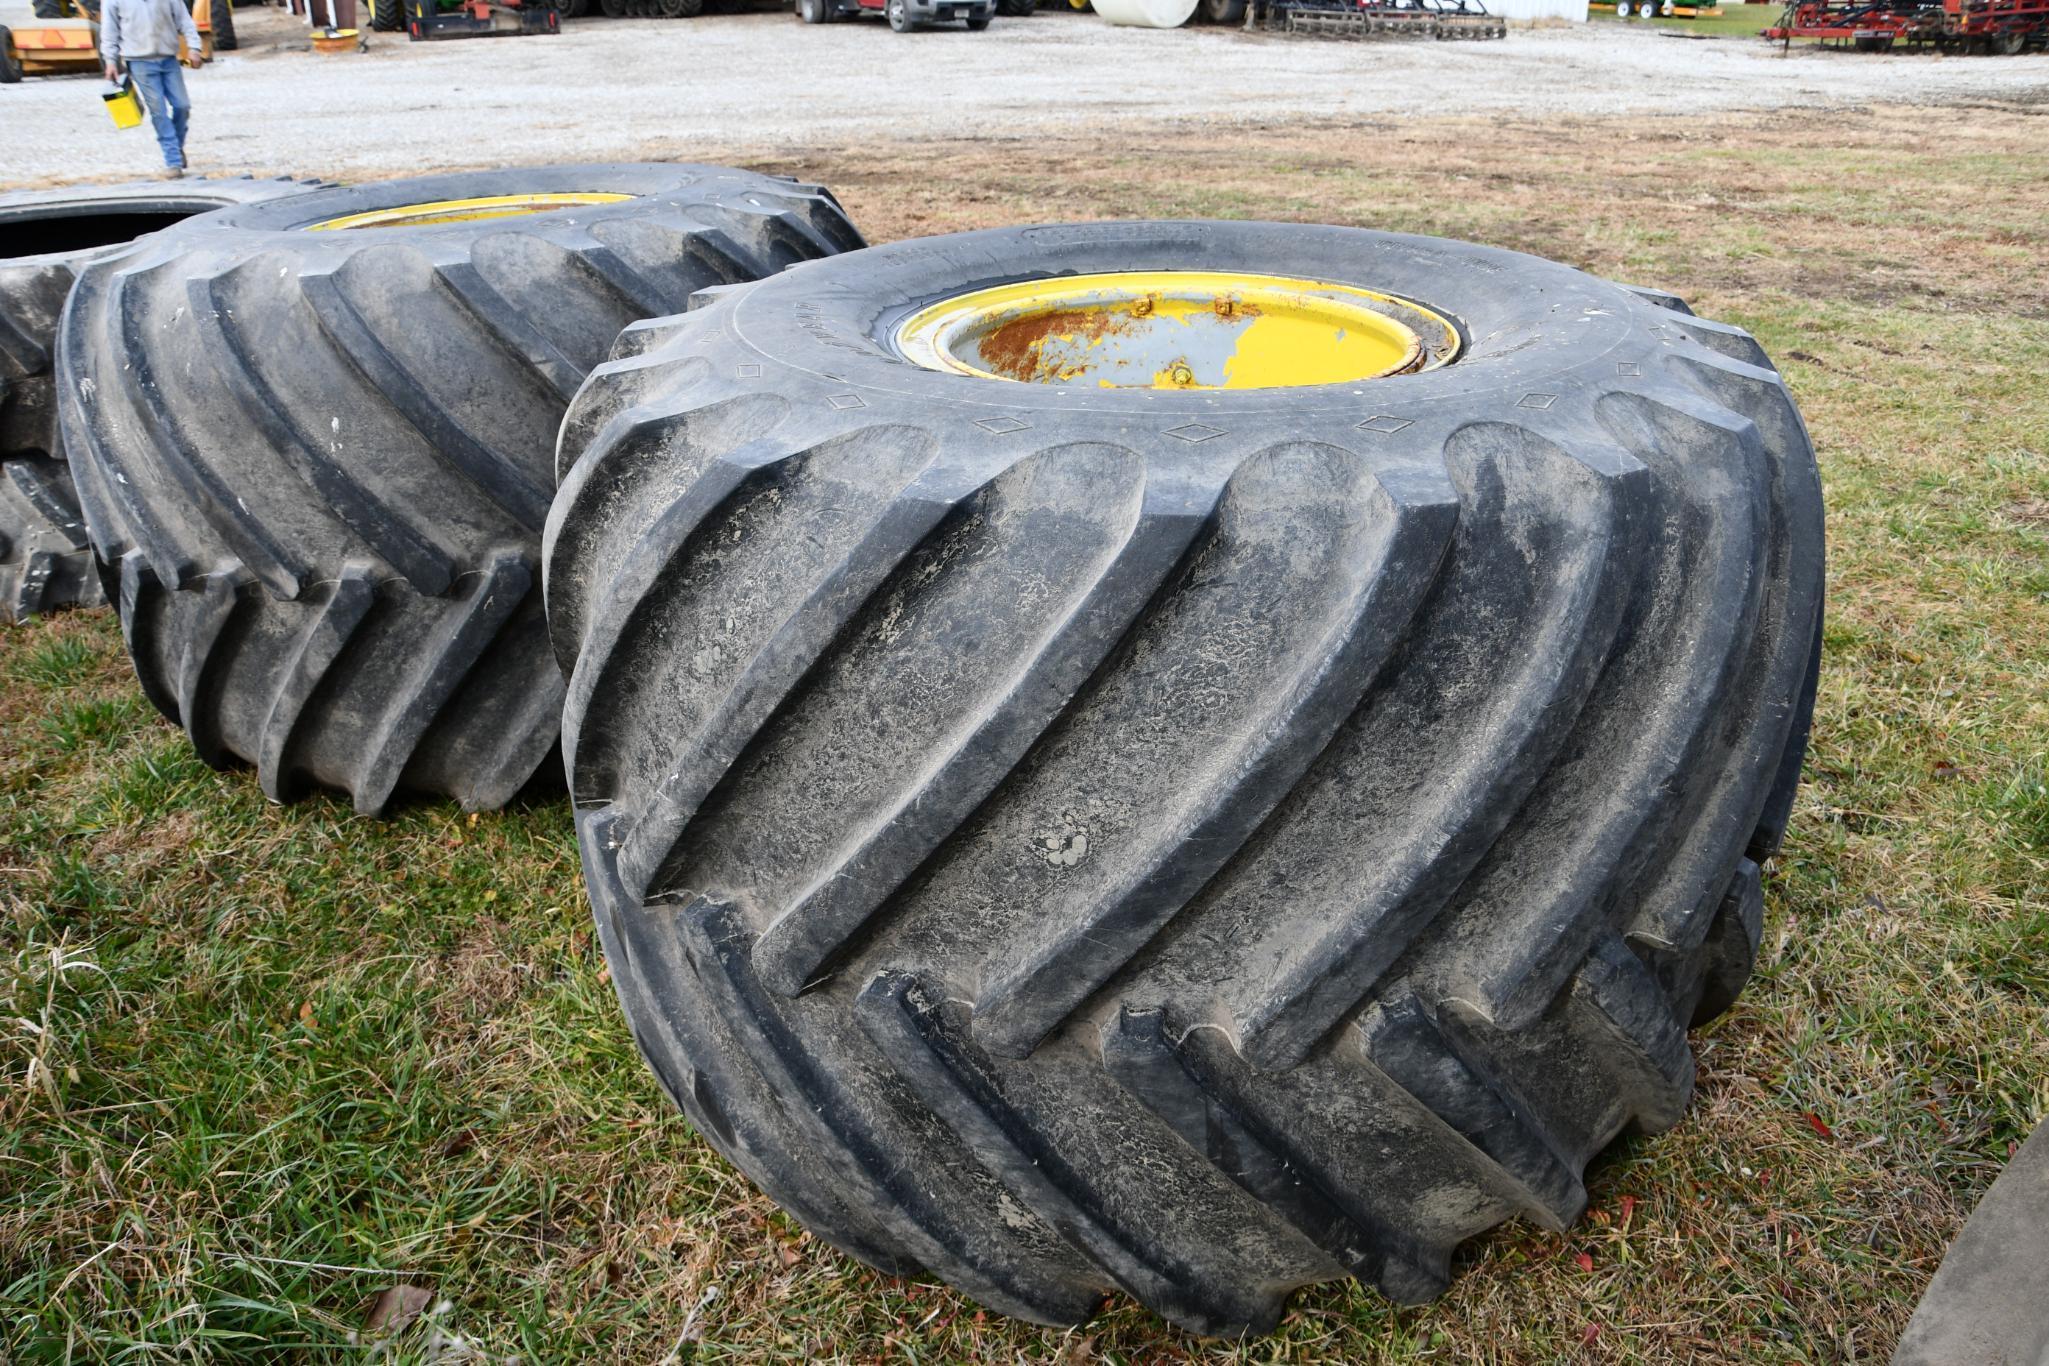 (2) 66x43.00-25 floater tires and wheels